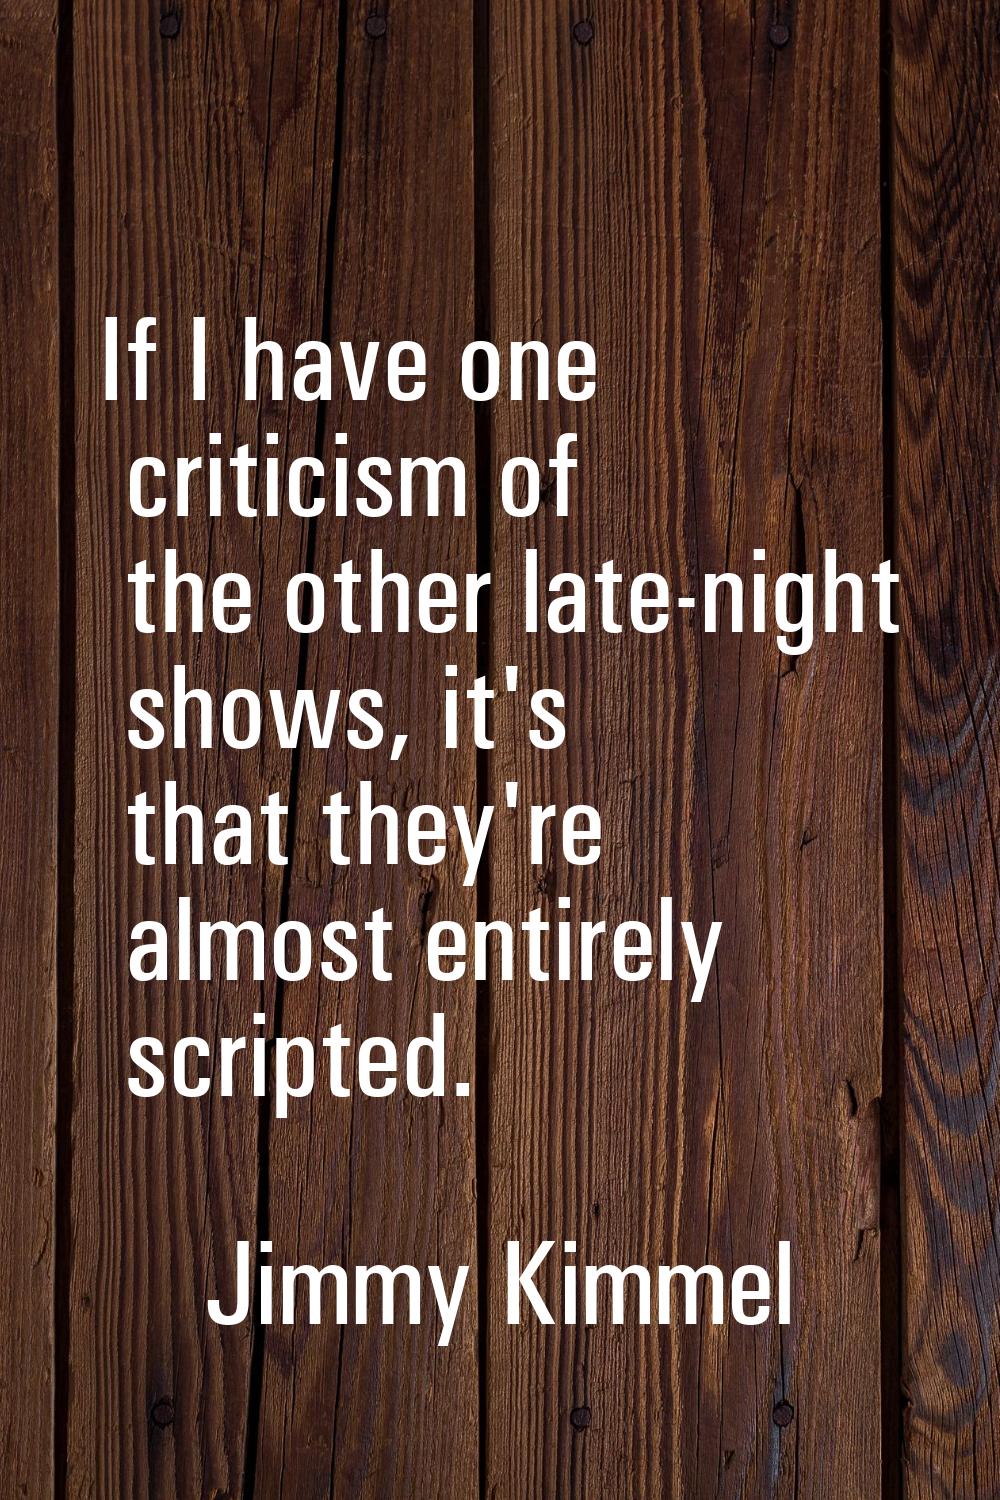 If I have one criticism of the other late-night shows, it's that they're almost entirely scripted.